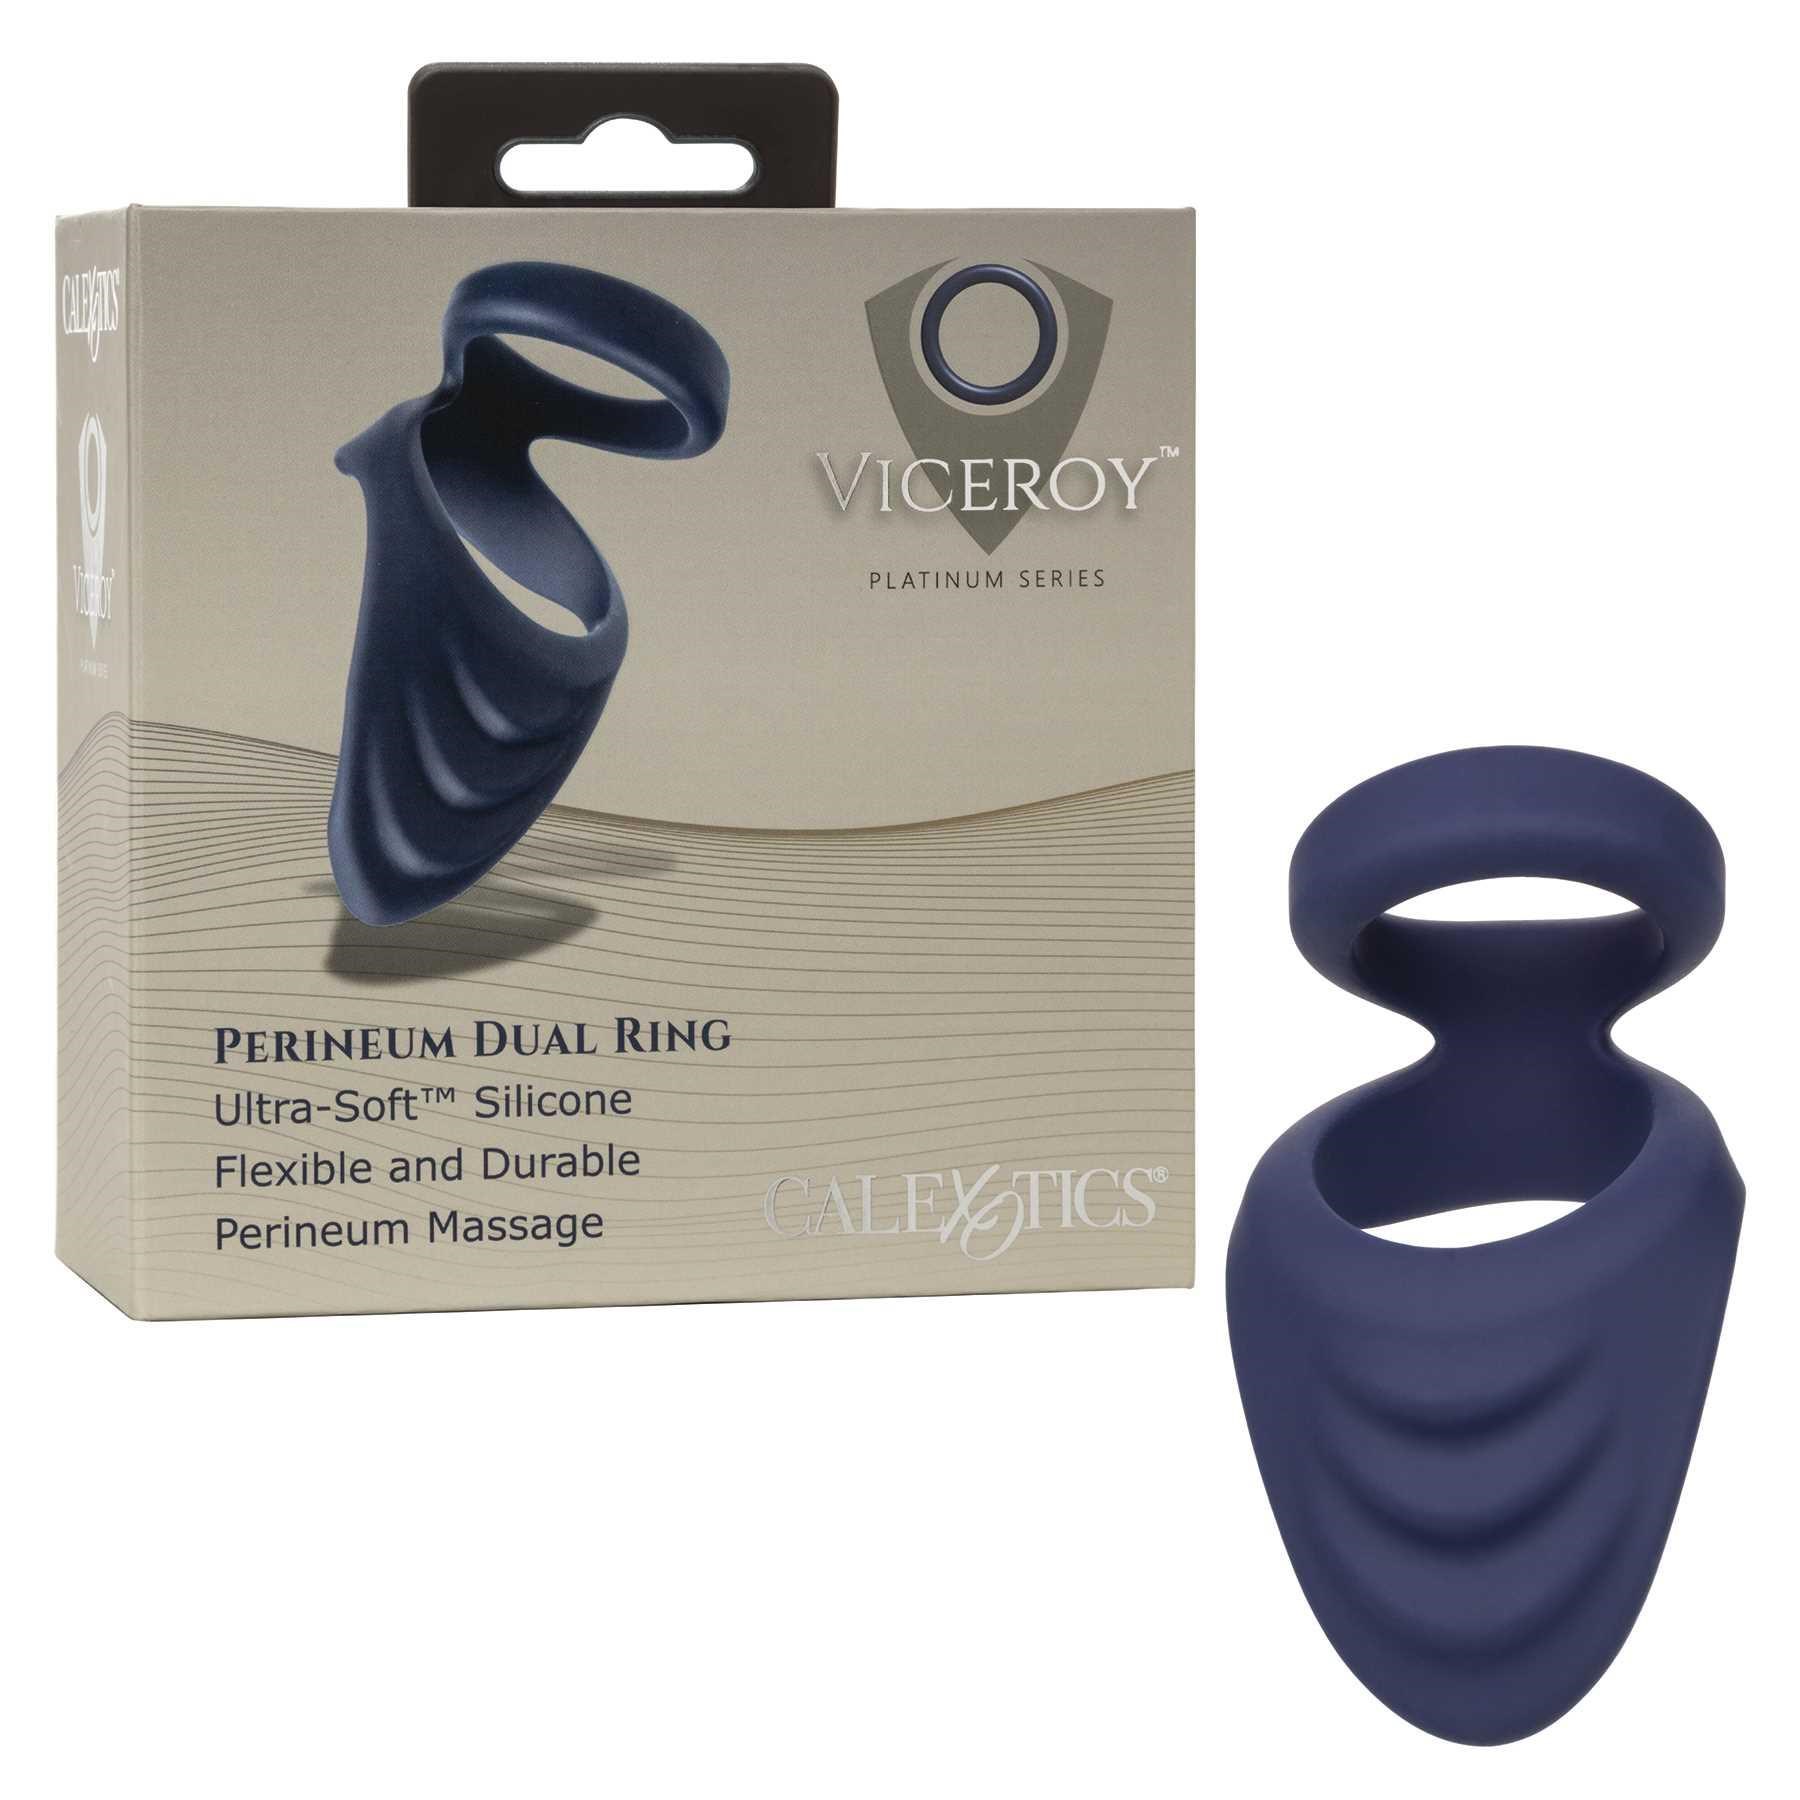 Viceroy Perineum Dual Ring with box packaging